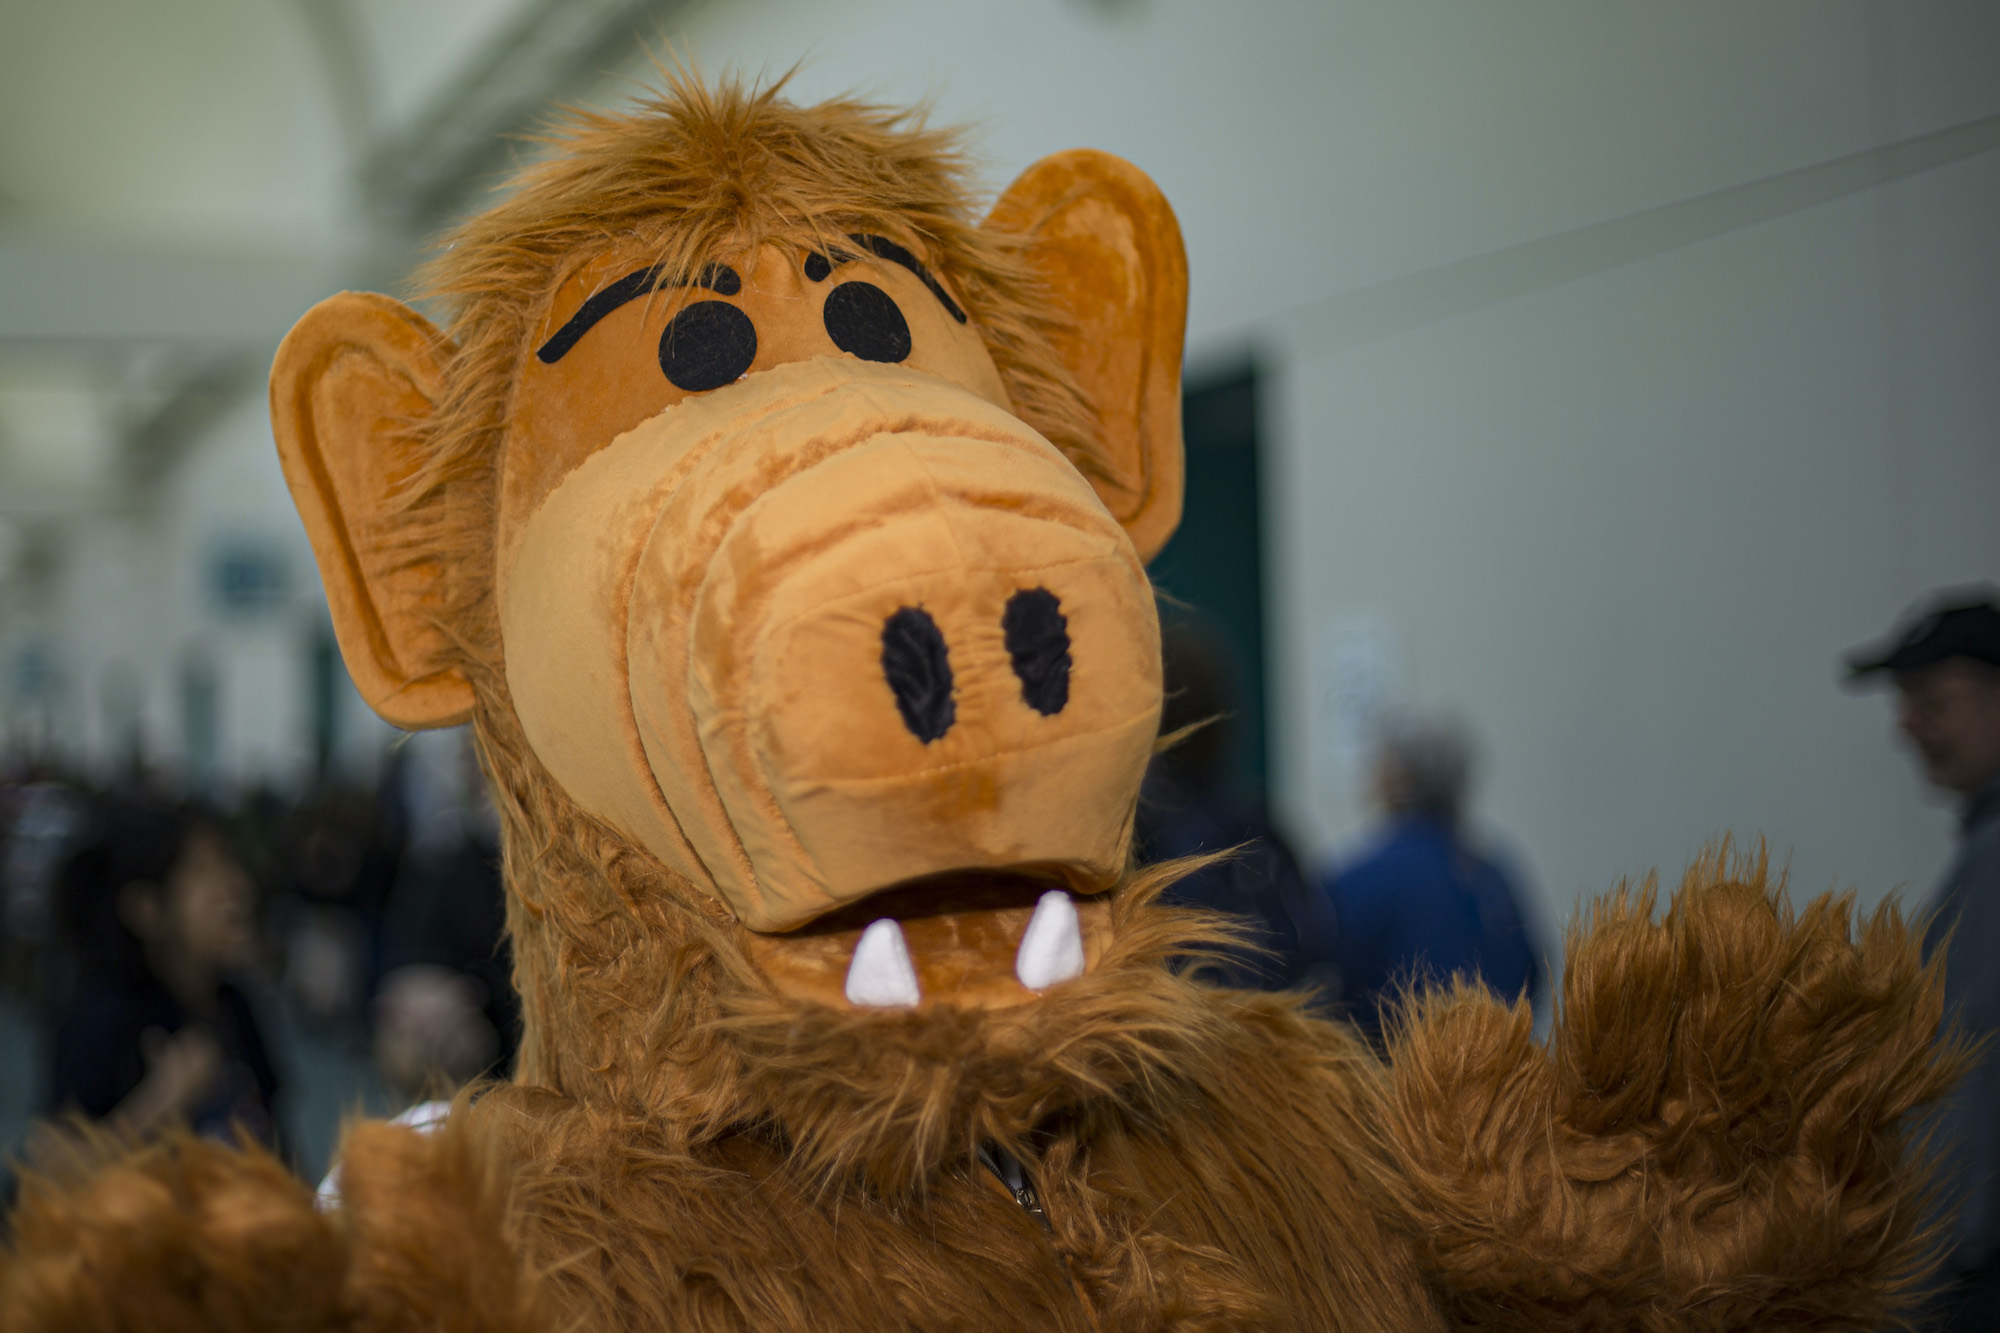 Alf cosplayer Christian Ruiz in front of a blurred background